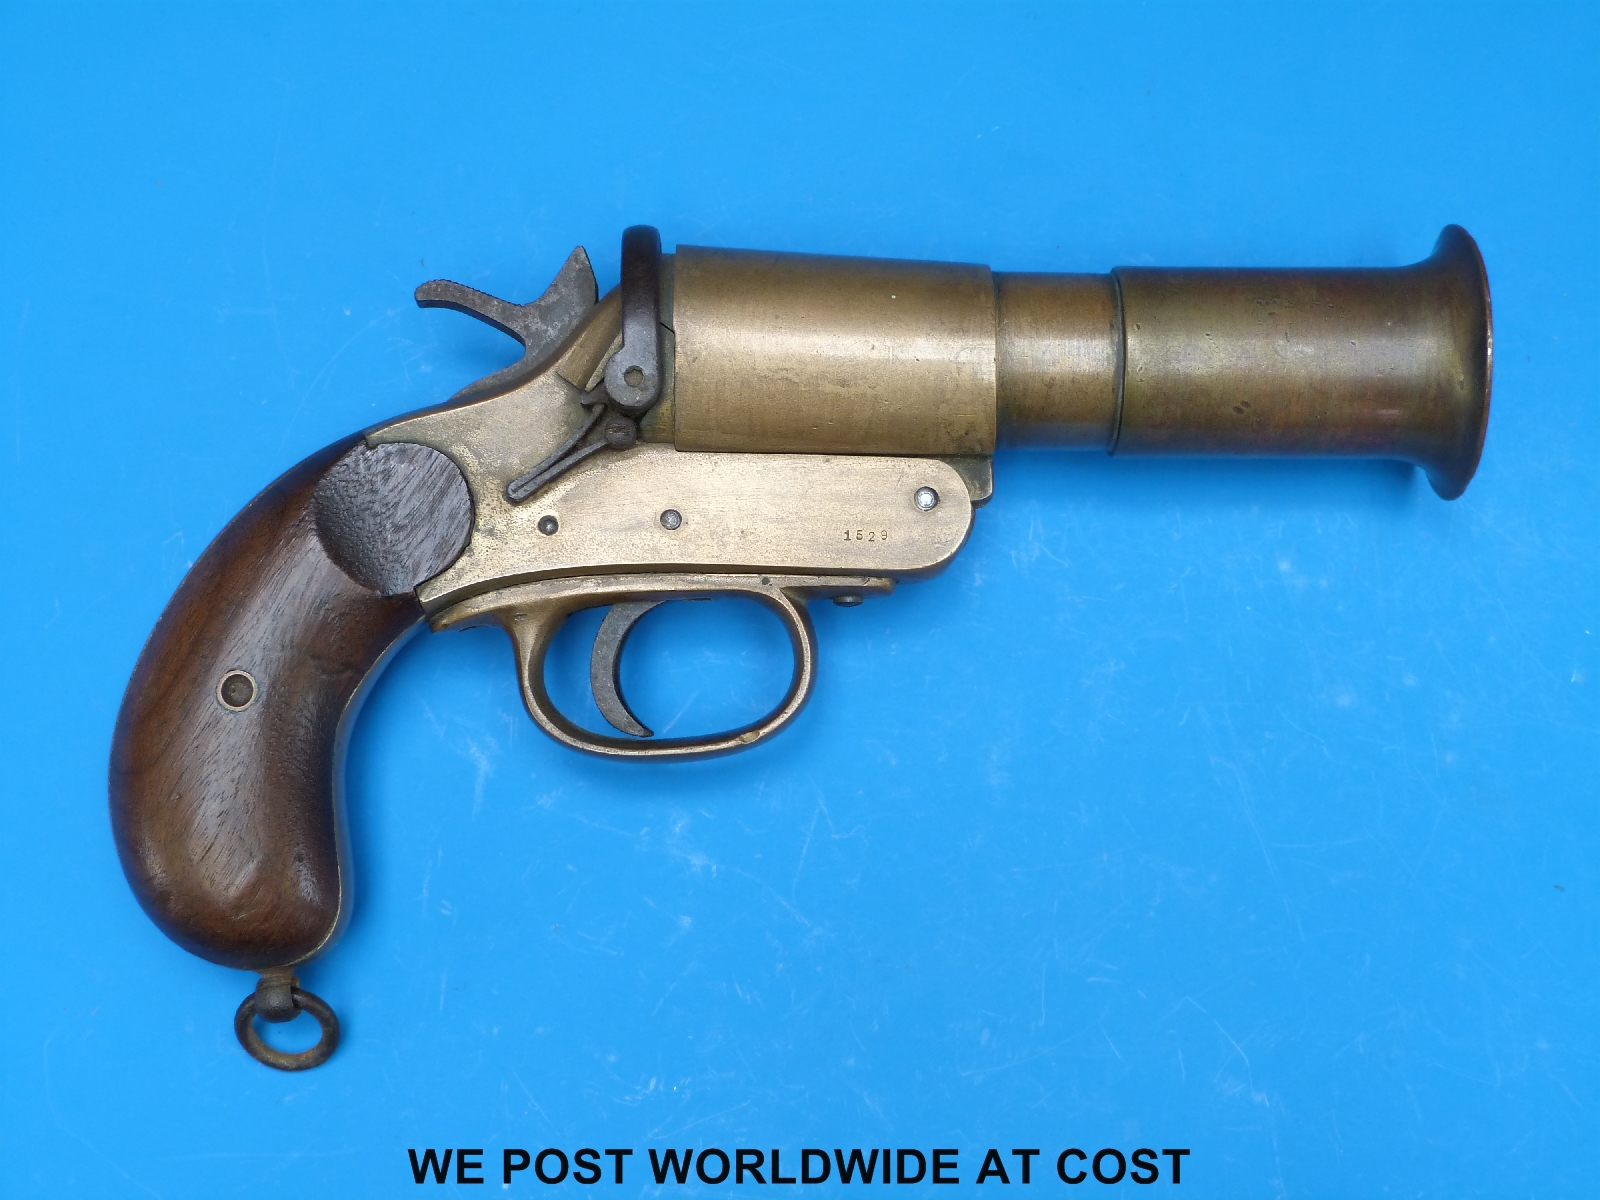 Wolseley No 1 Mark III flare gun or Very/signal pistol marked Woseley 1917 and with multiple proof